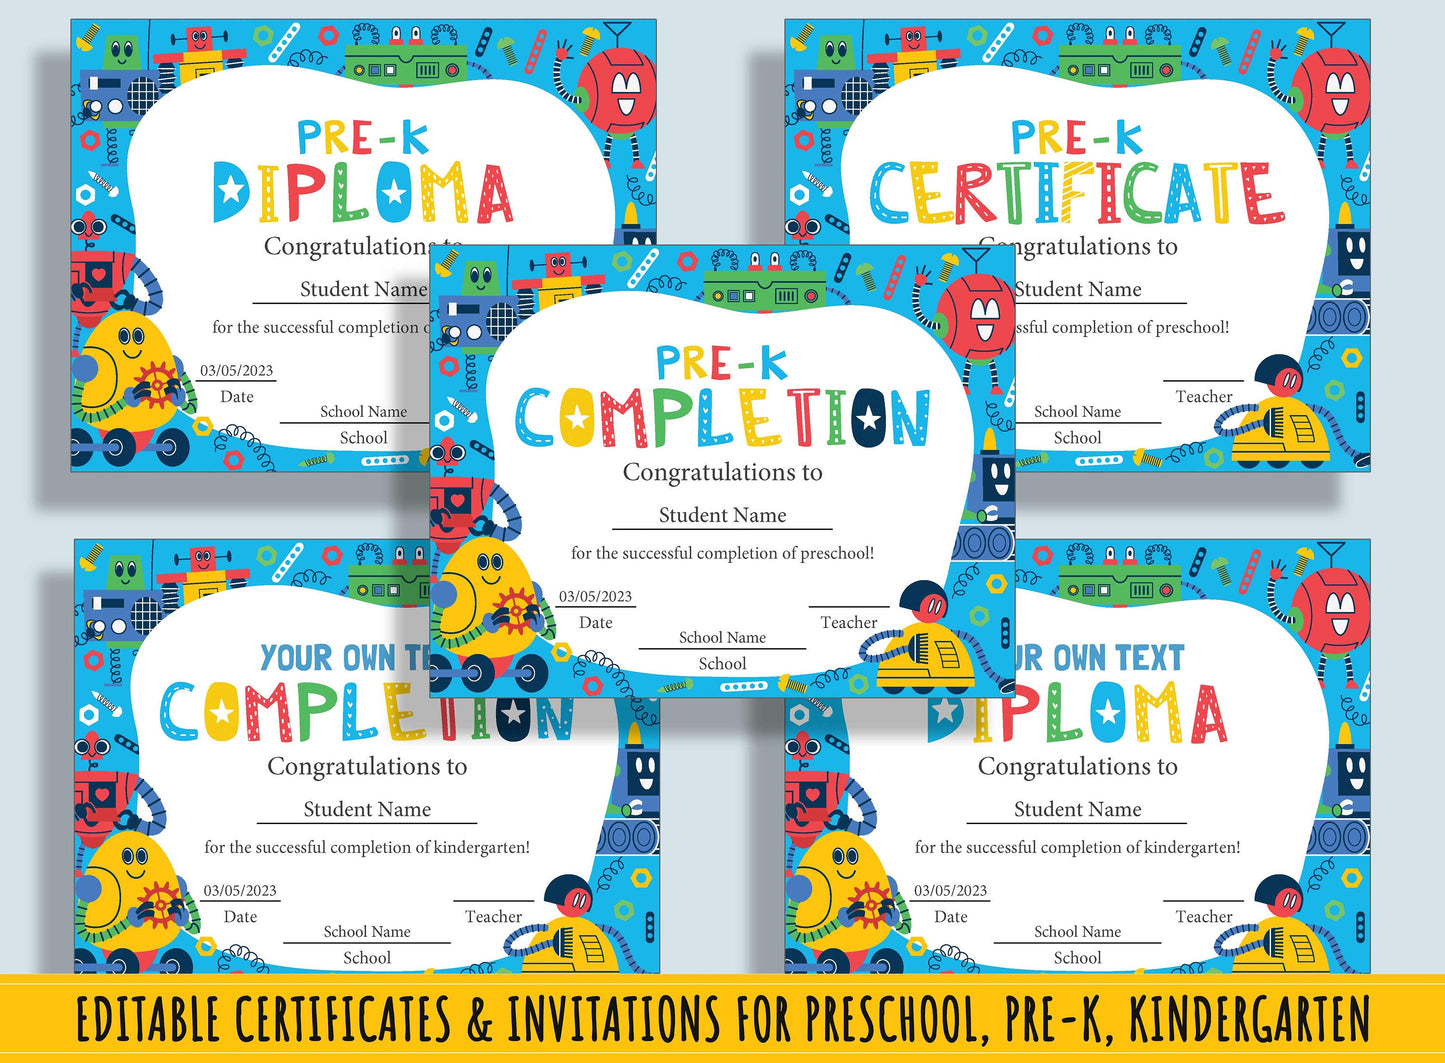 Little Learner's Diploma, Certificate, Invitation Collection: 37 Editable Pages for Preschool & Kindergarten Graduation, Instant Download